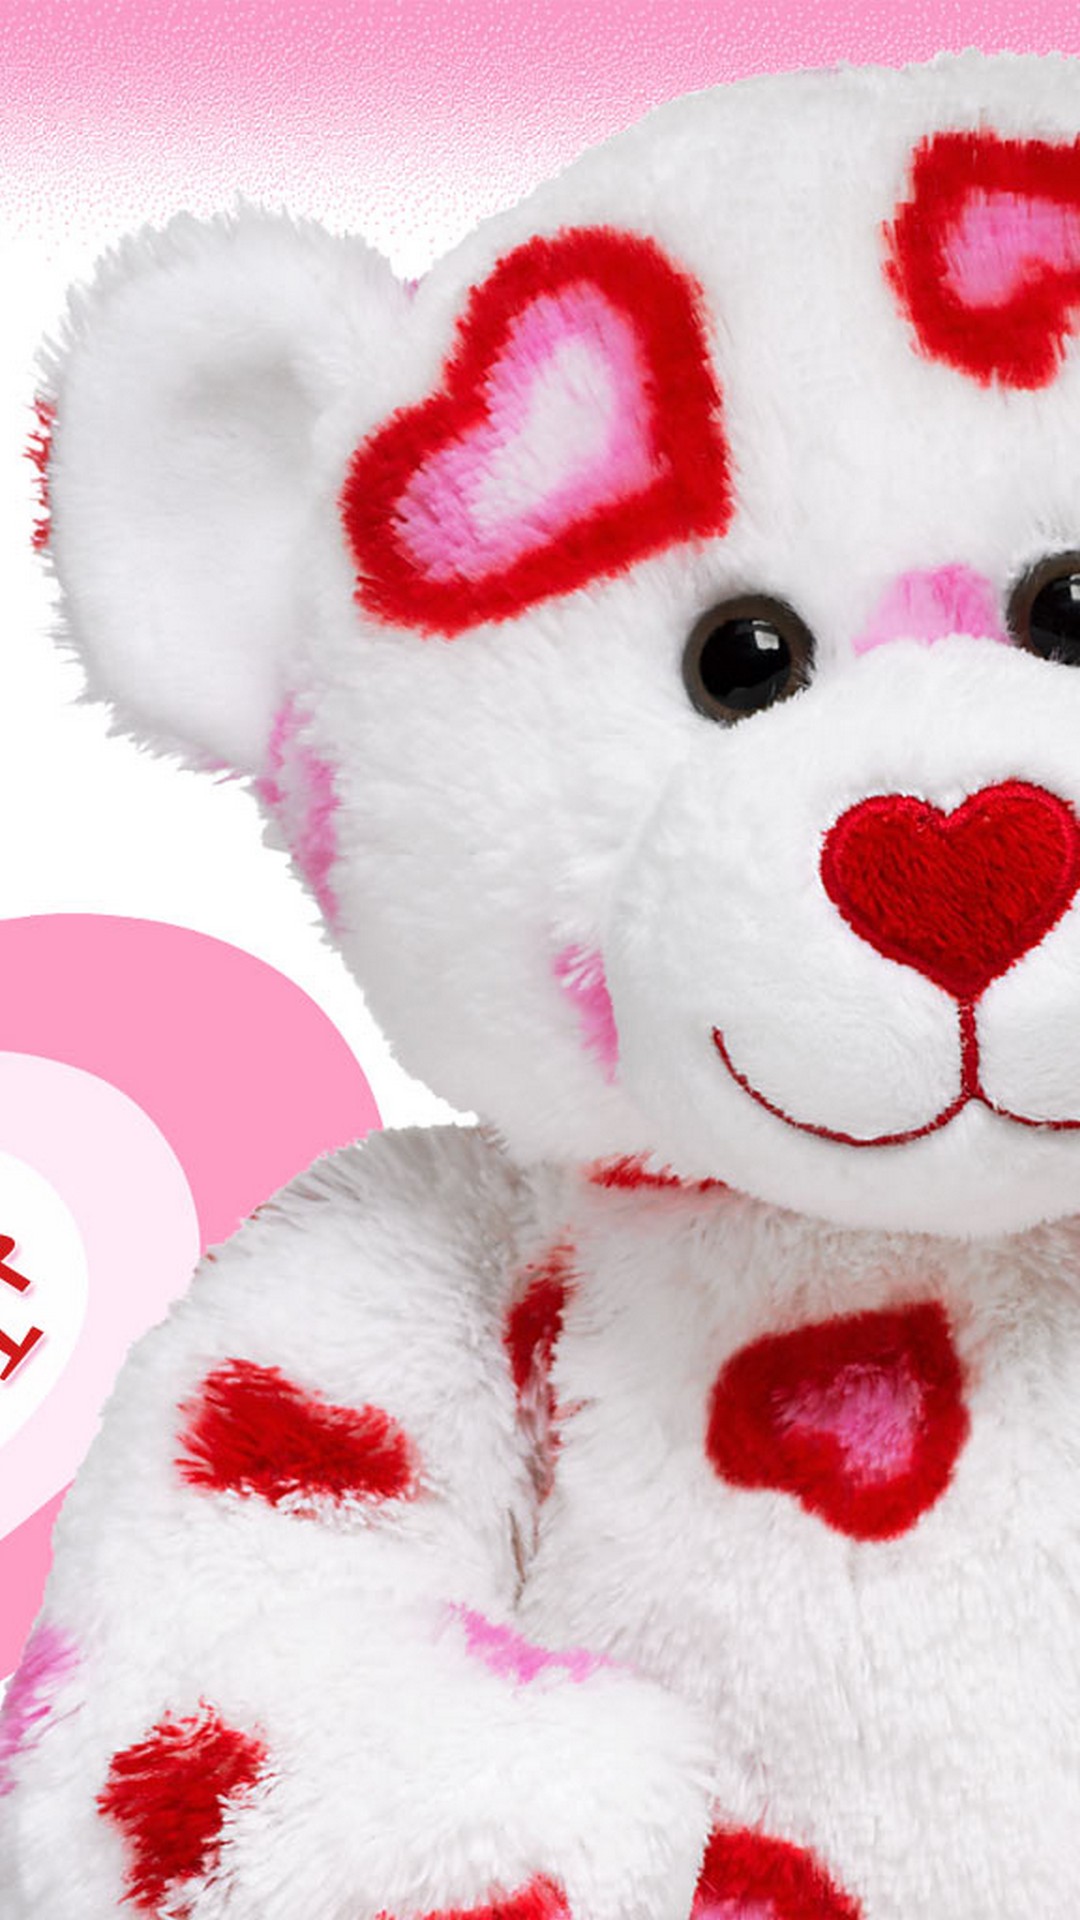 Teddy Bear Giant Wallpaper Android With Image Resolution - Feeling Happy With Love - HD Wallpaper 